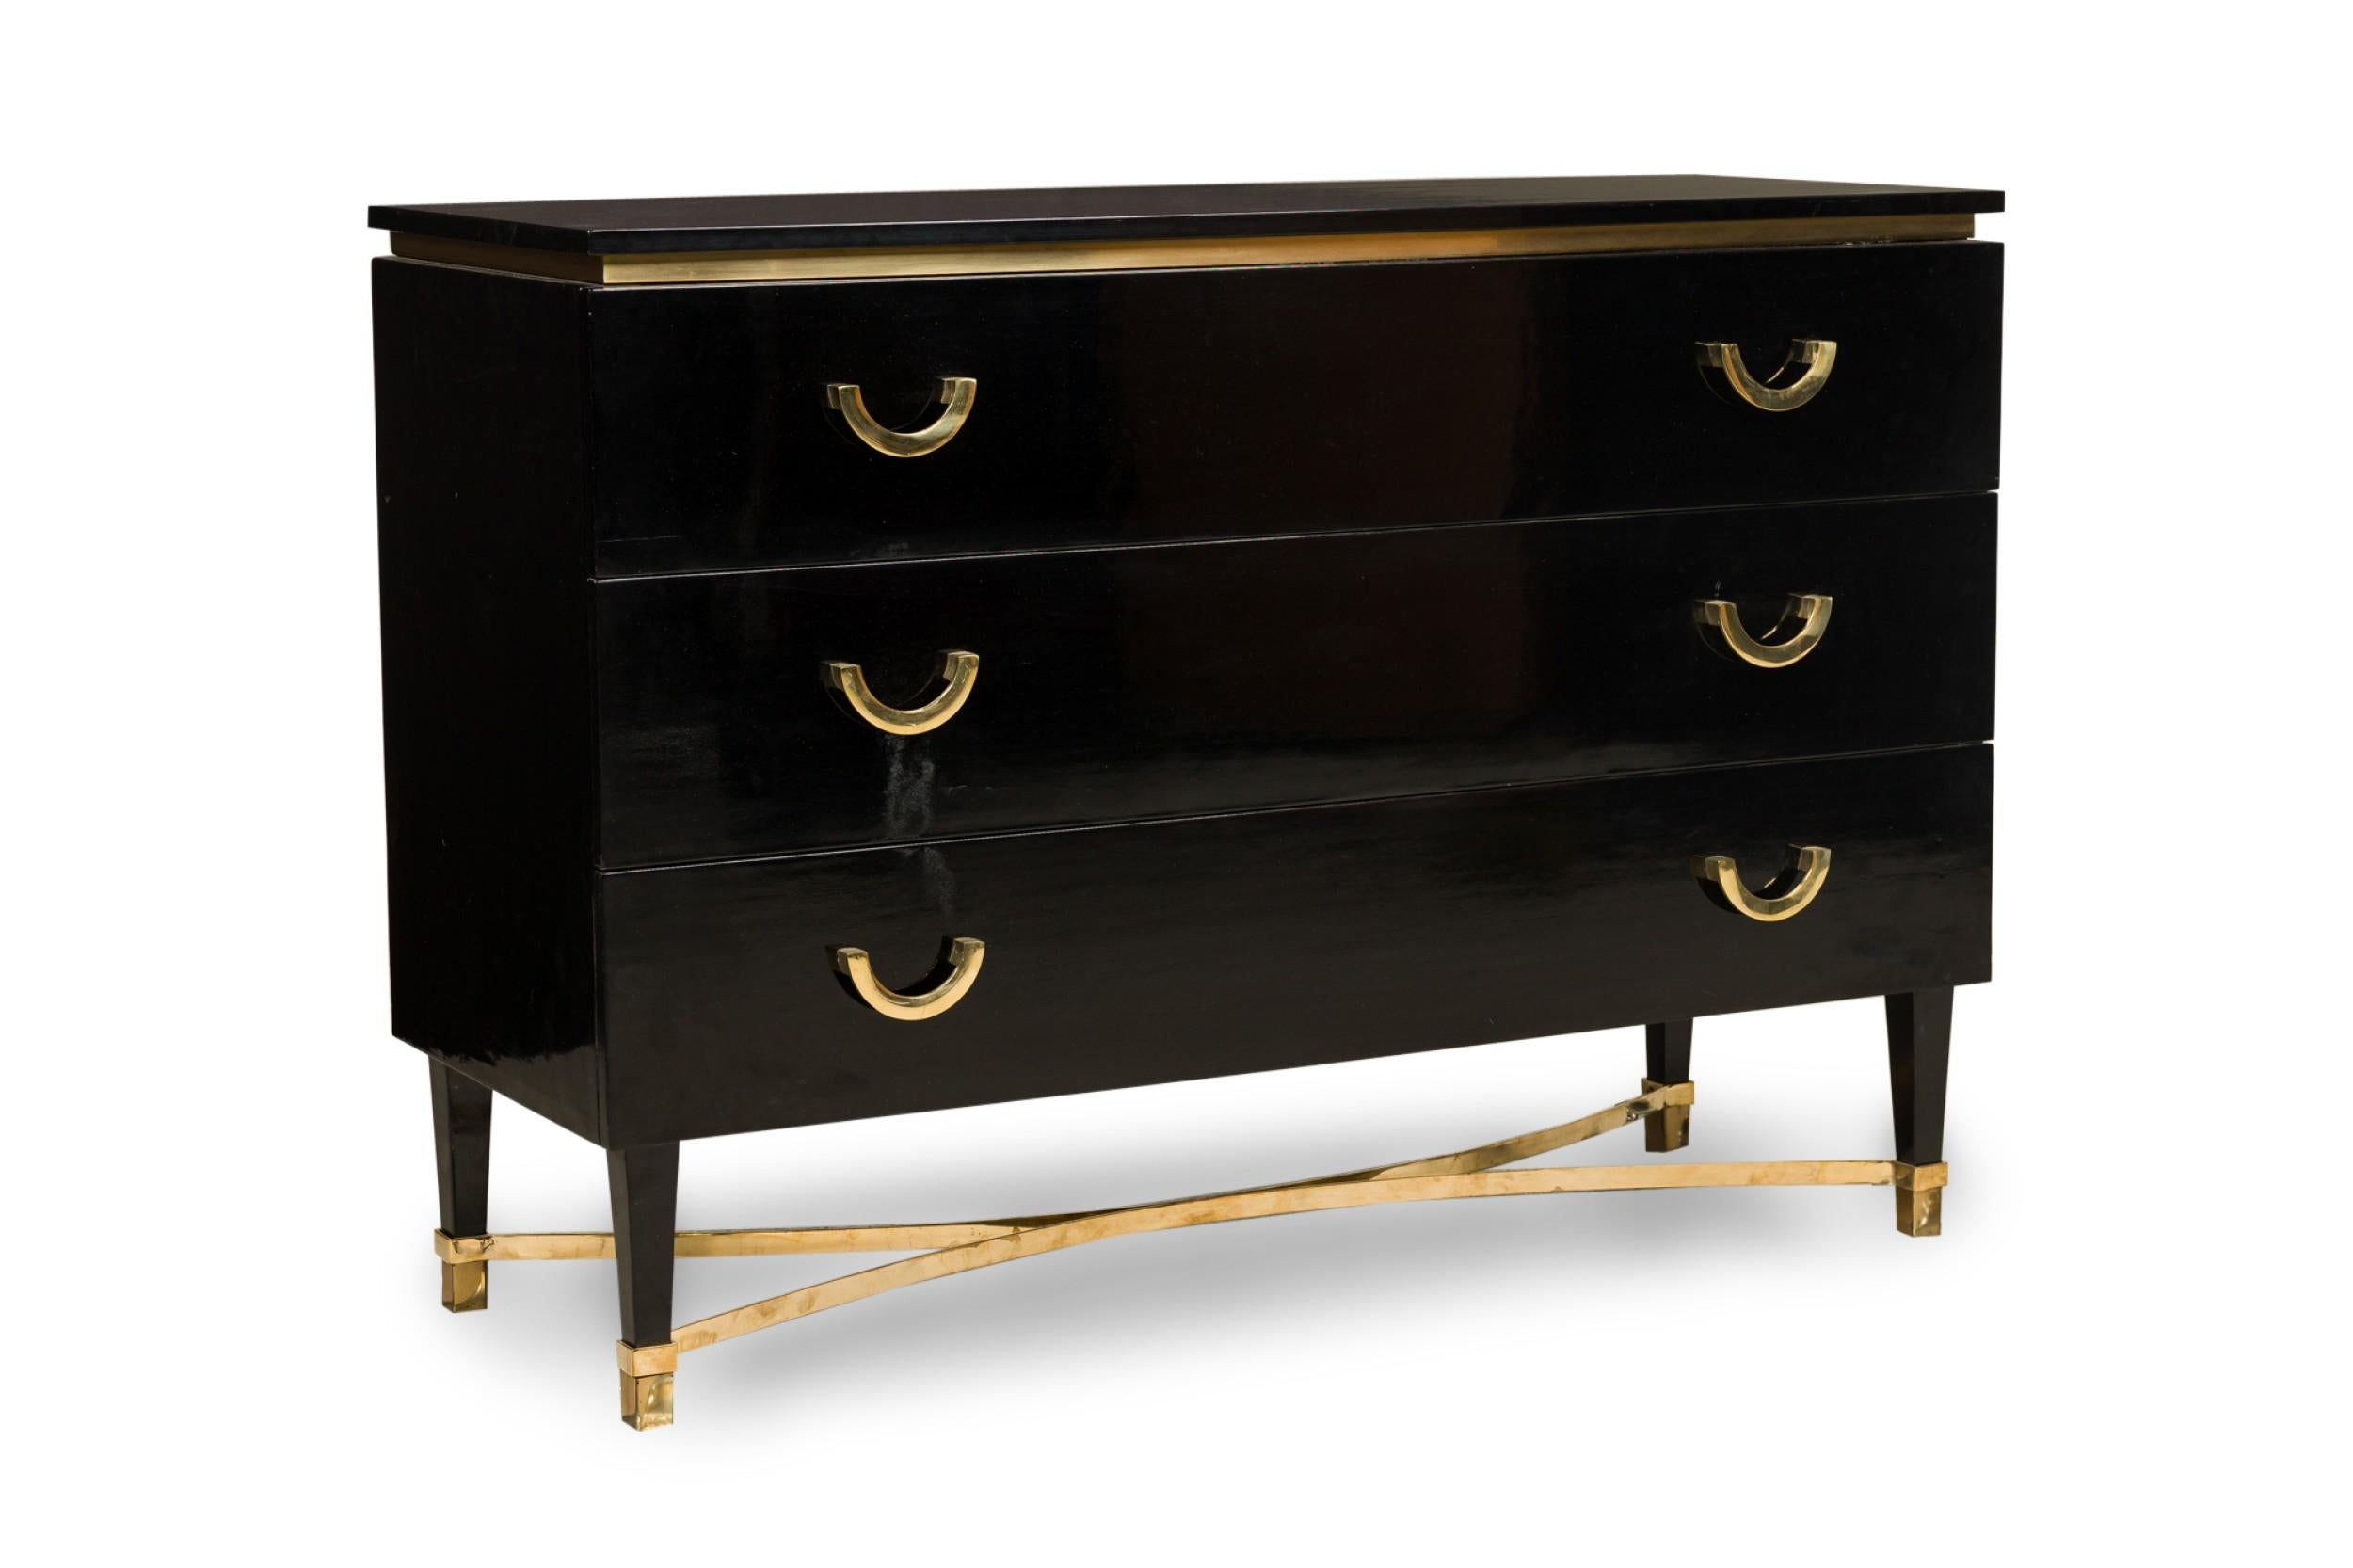 Pair of midcentury Continental black lacquered rectangular wood dressers featuring a waisted top with bronze banding, 3 pullout drawers with 2 columns of bronze demilune pulls, resting on 4 tapered legs with bronze sabots, anchored by a concave